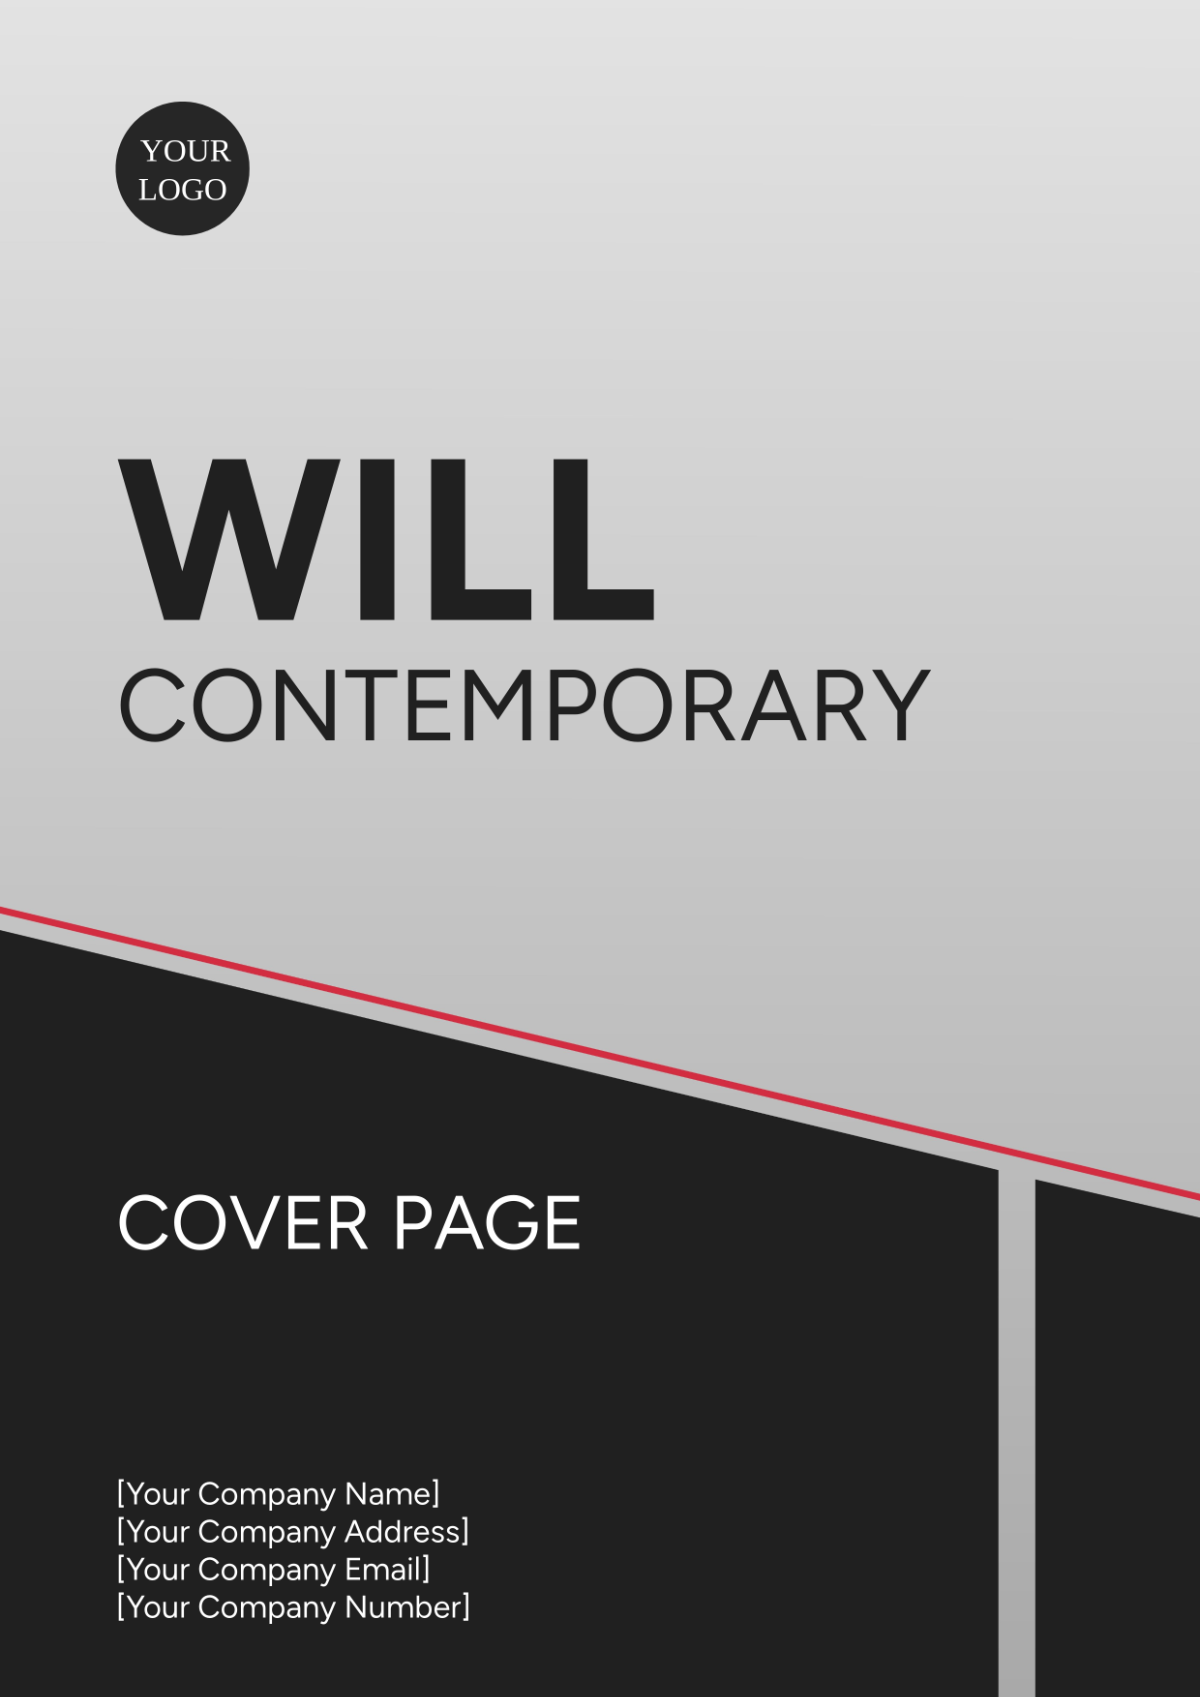 Will Contemporary Cover Page